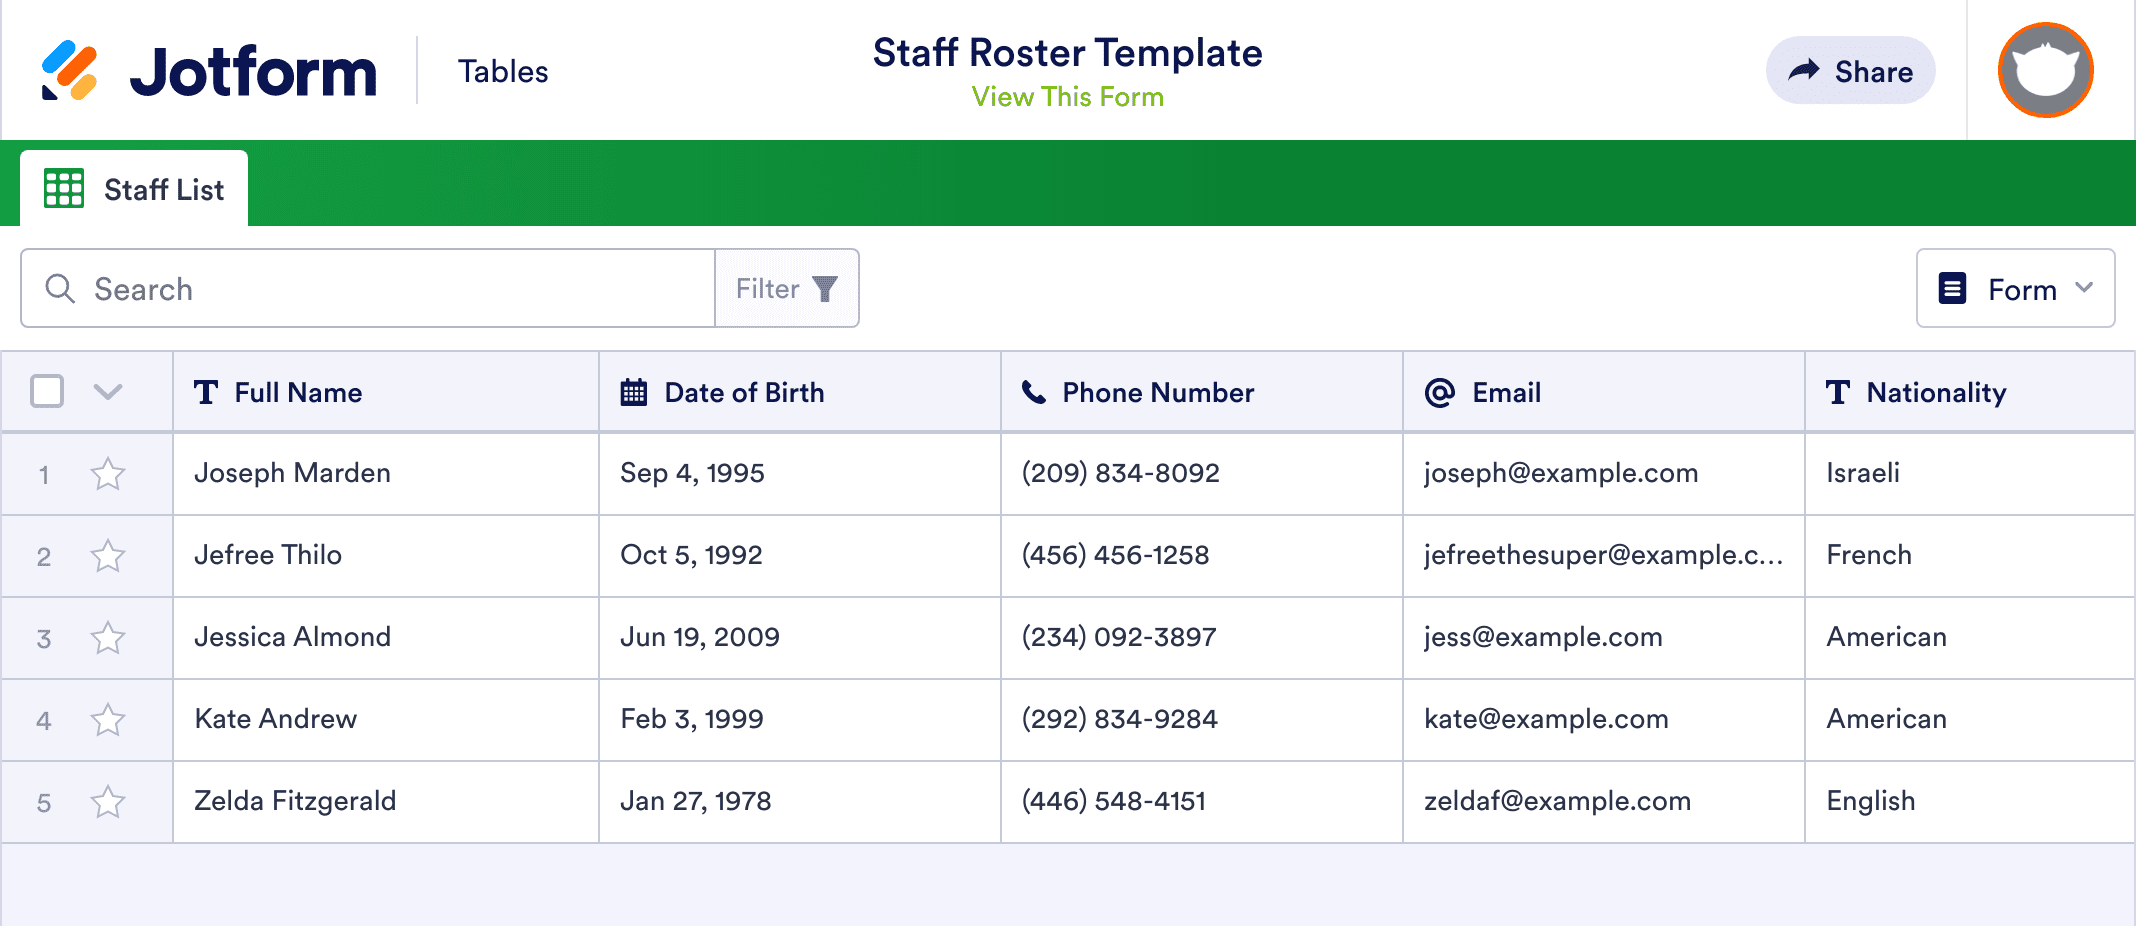 Staff Roster Template